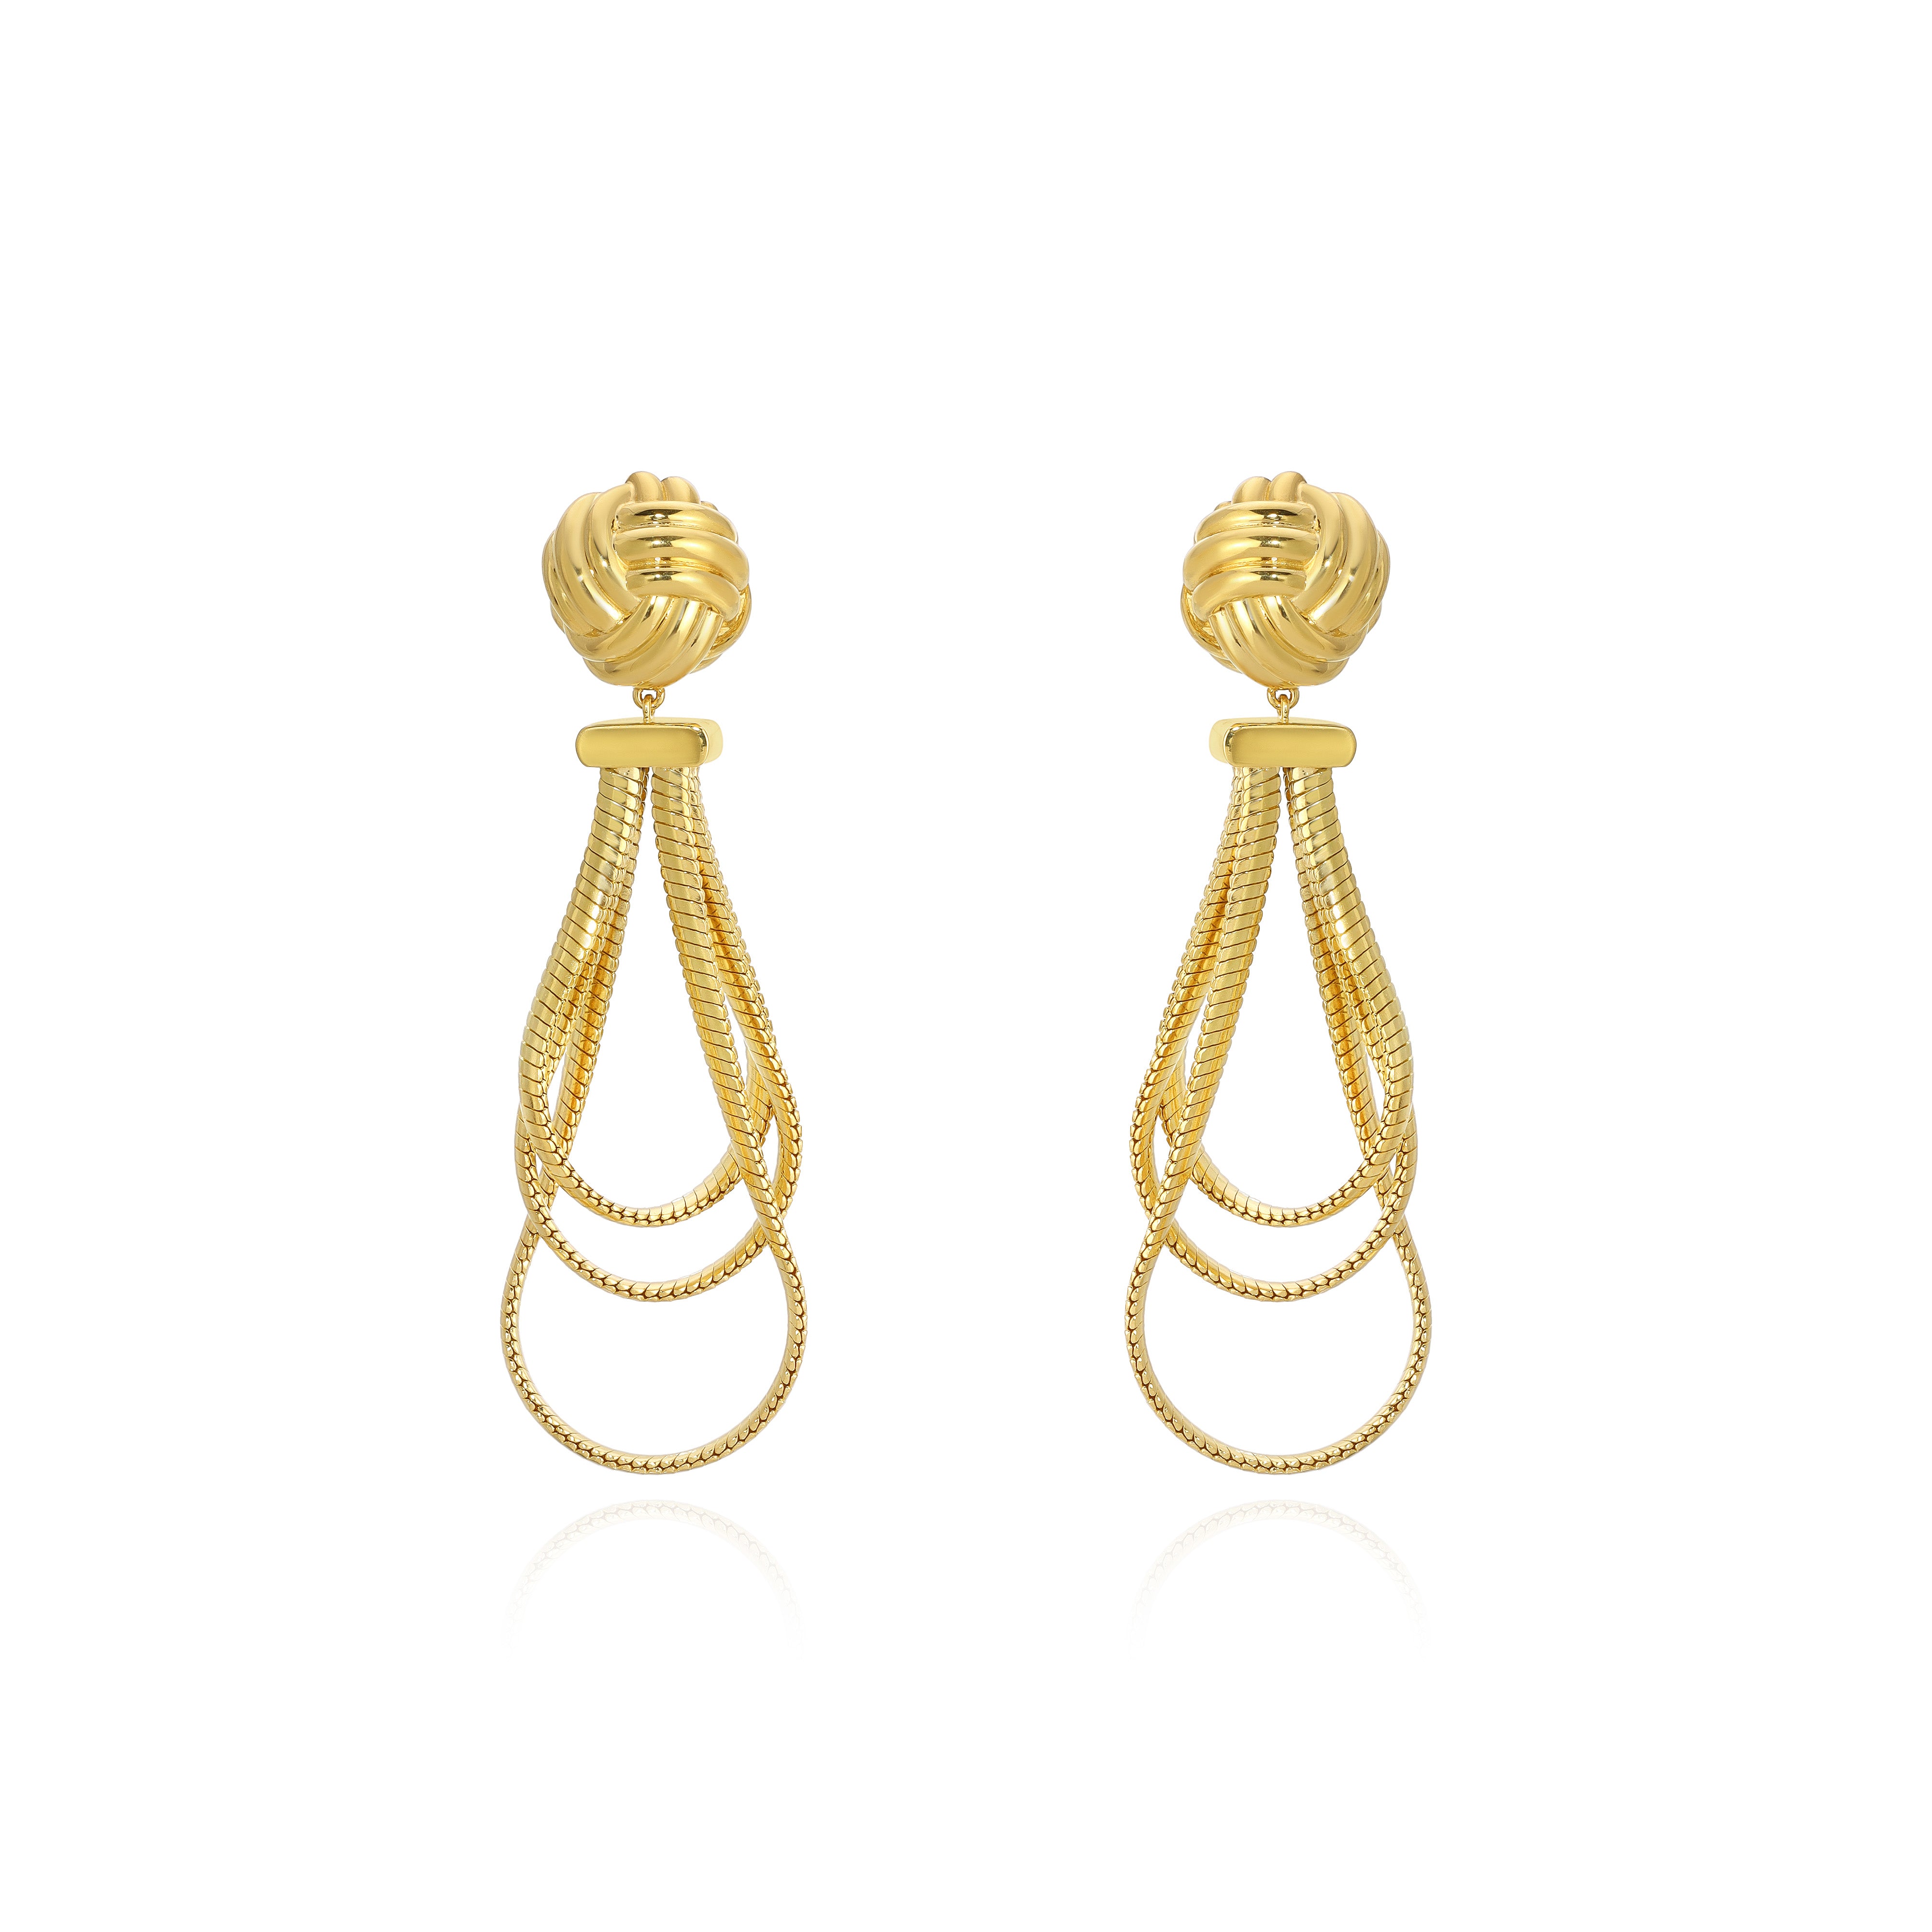 Yellow Gold Earrings with a macrame knot and three draped snake chains, Large